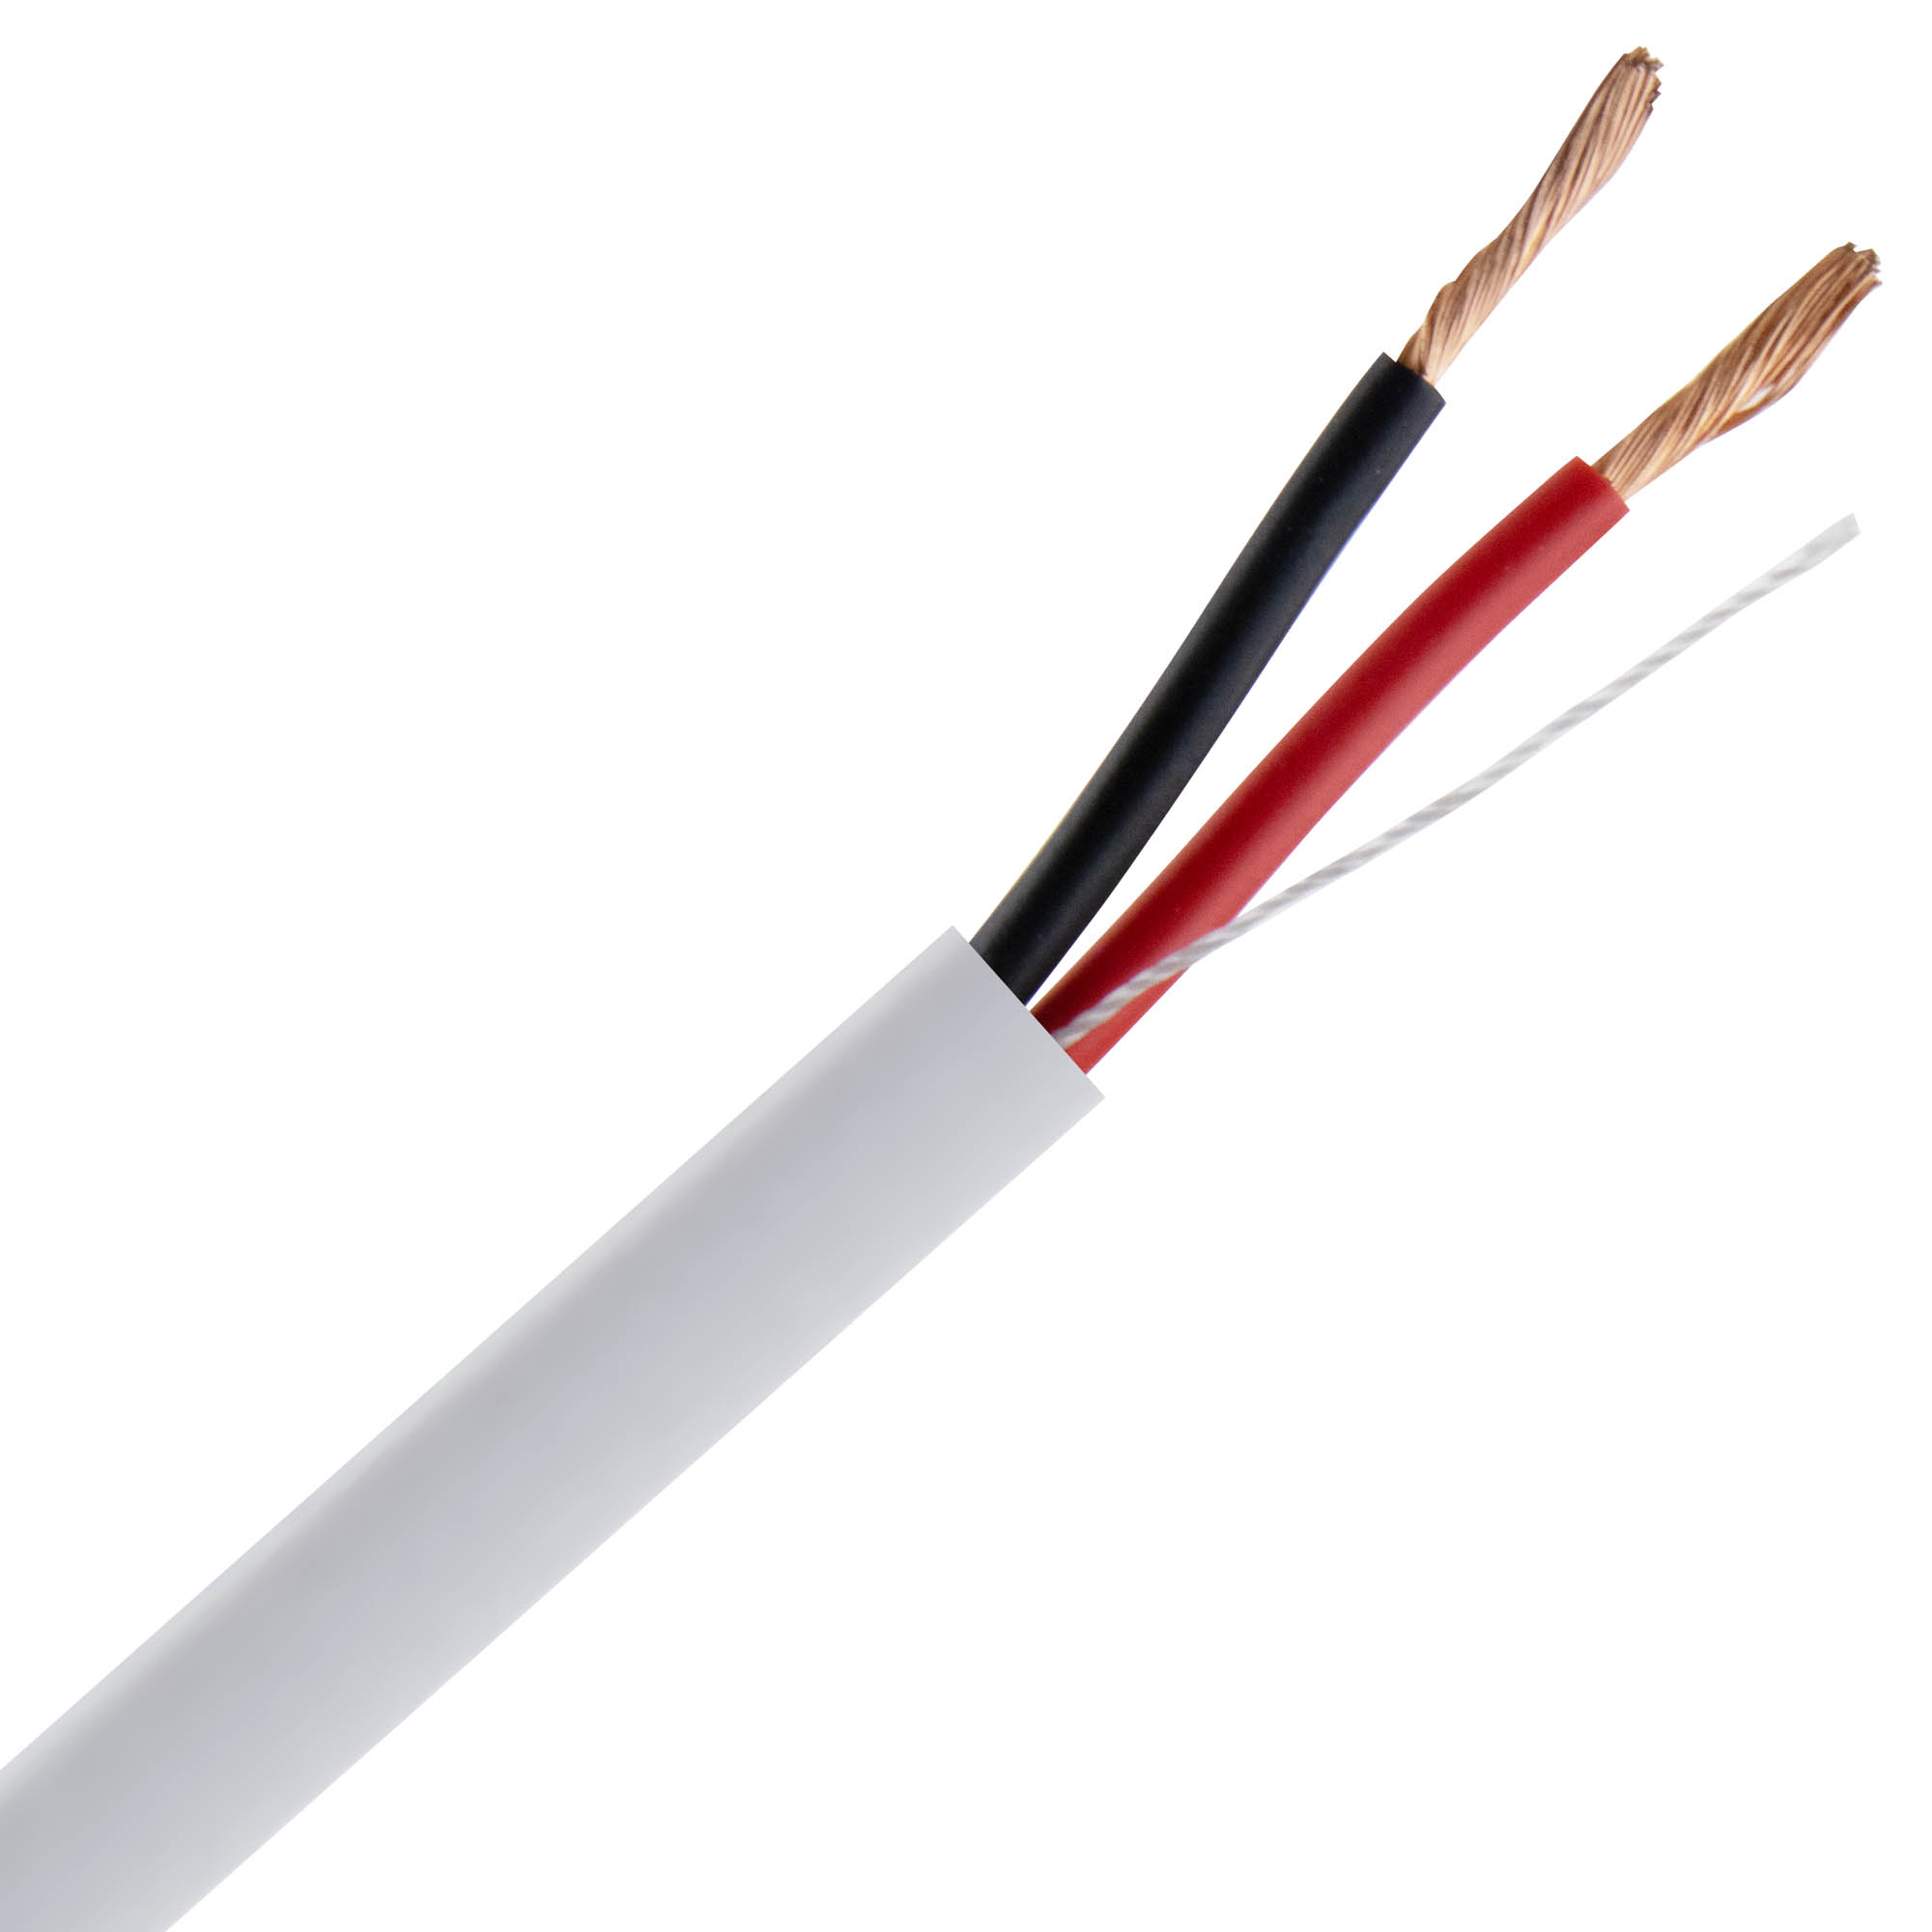 Loudspeaker cable 152m (500ft) 1.50mm OFC